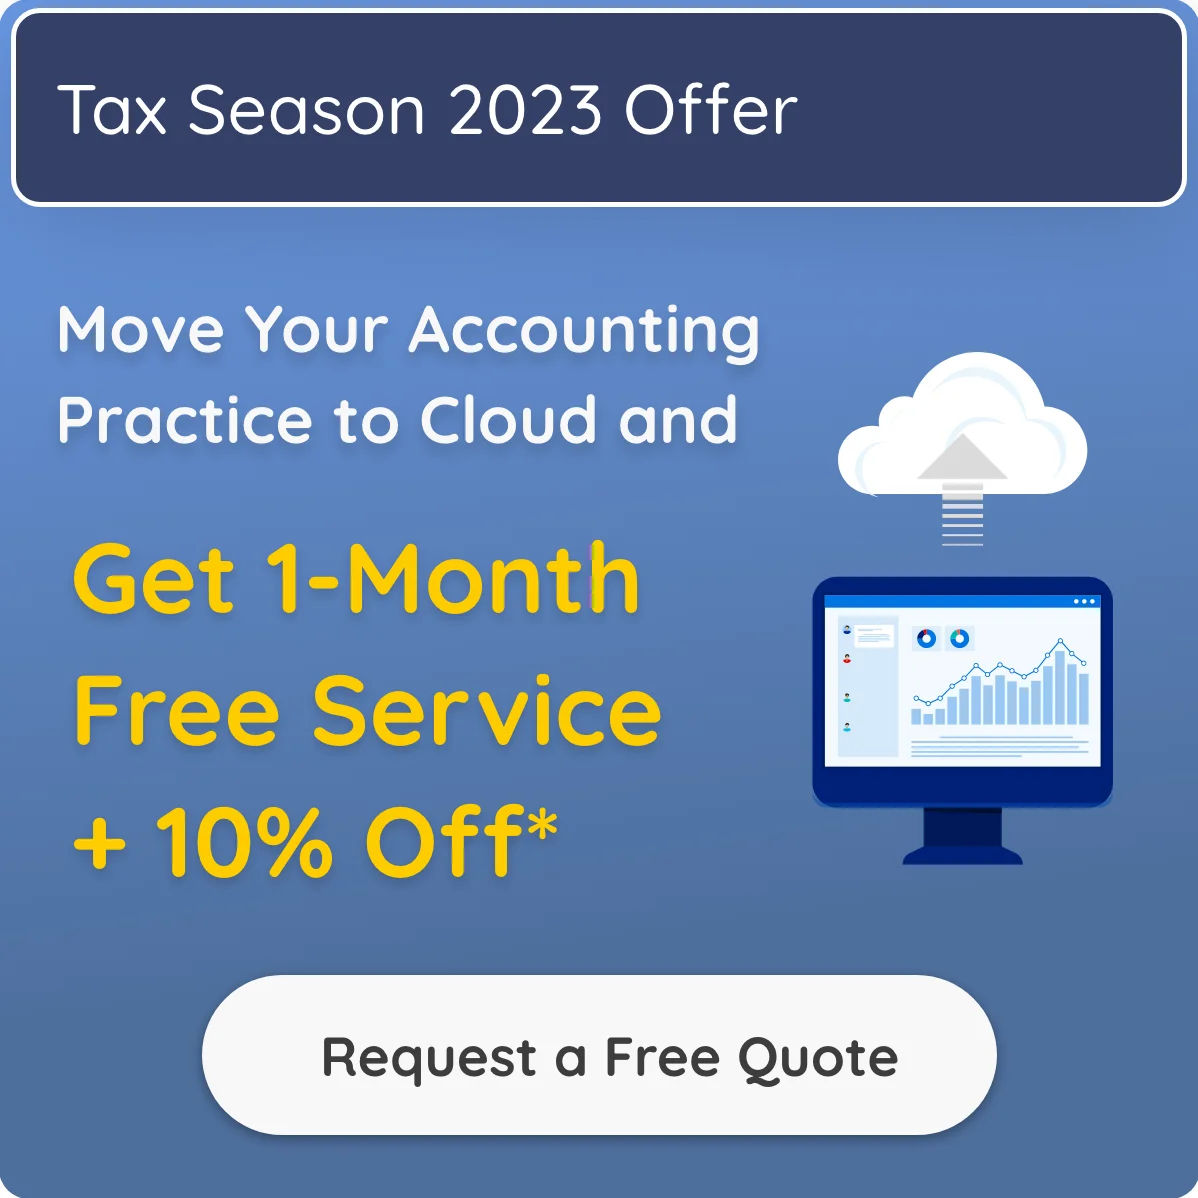 Move your Accounting Practice to cloud